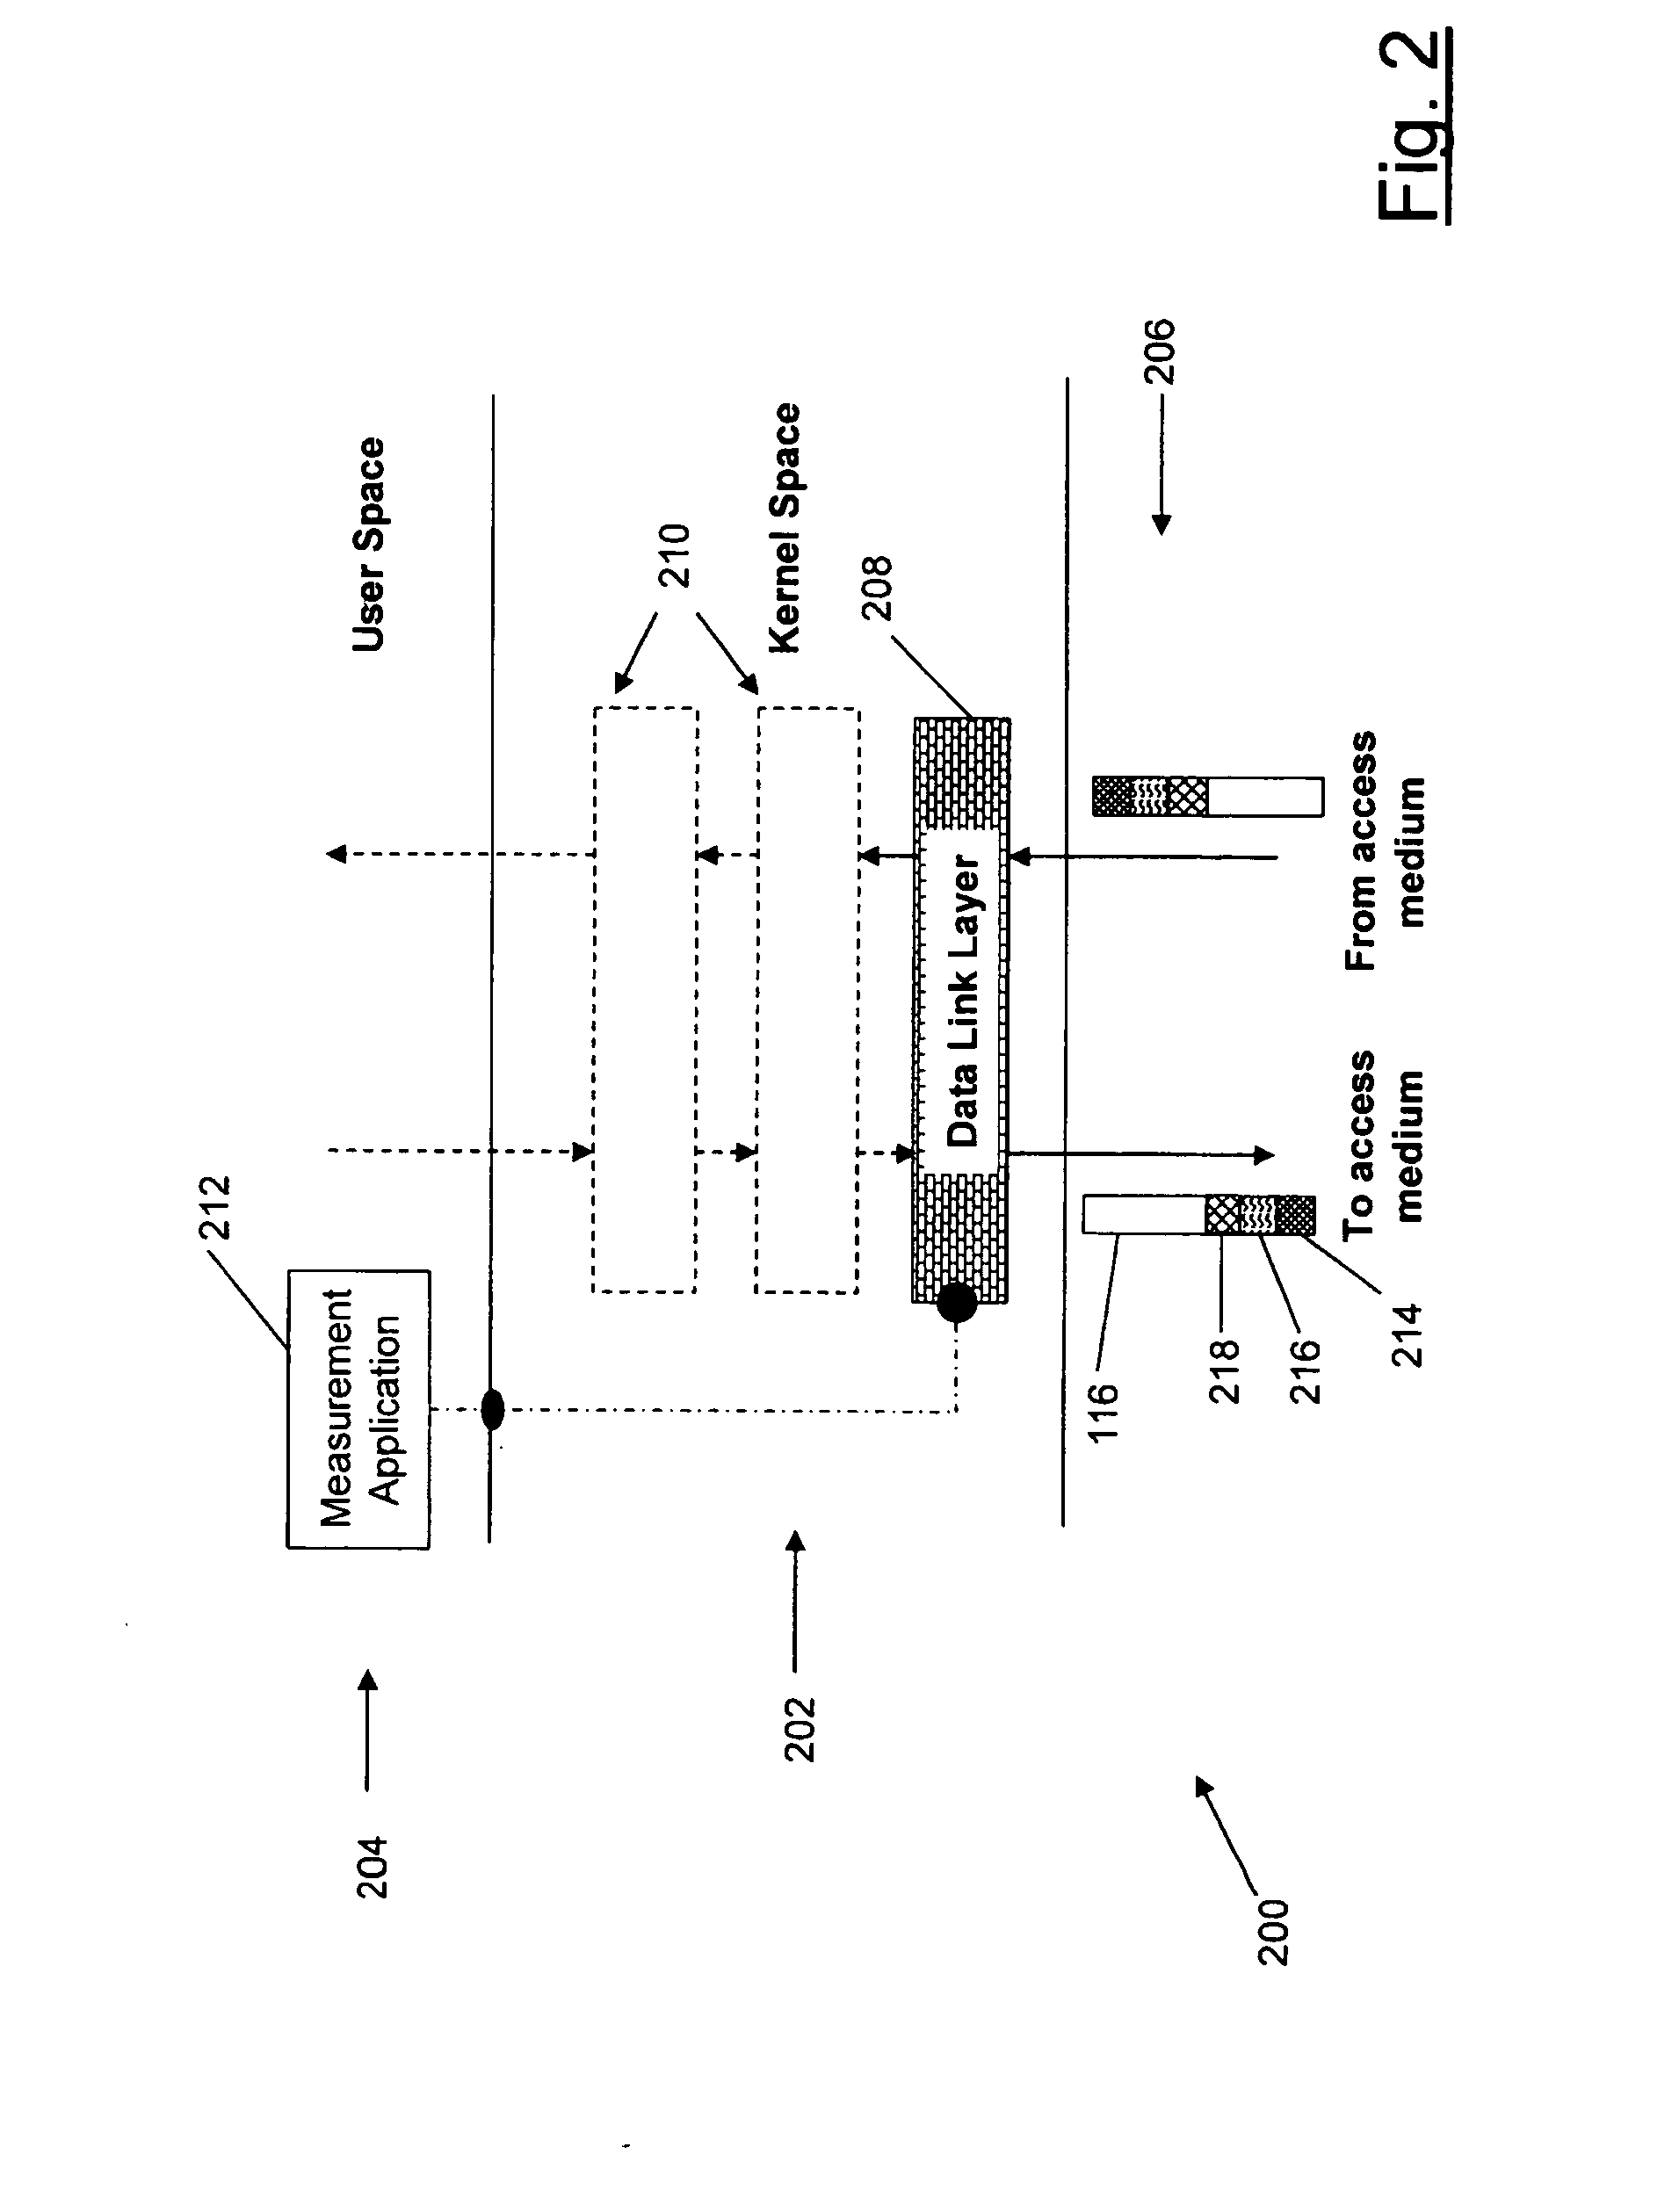 Method measuring a delay time metric and measurement system